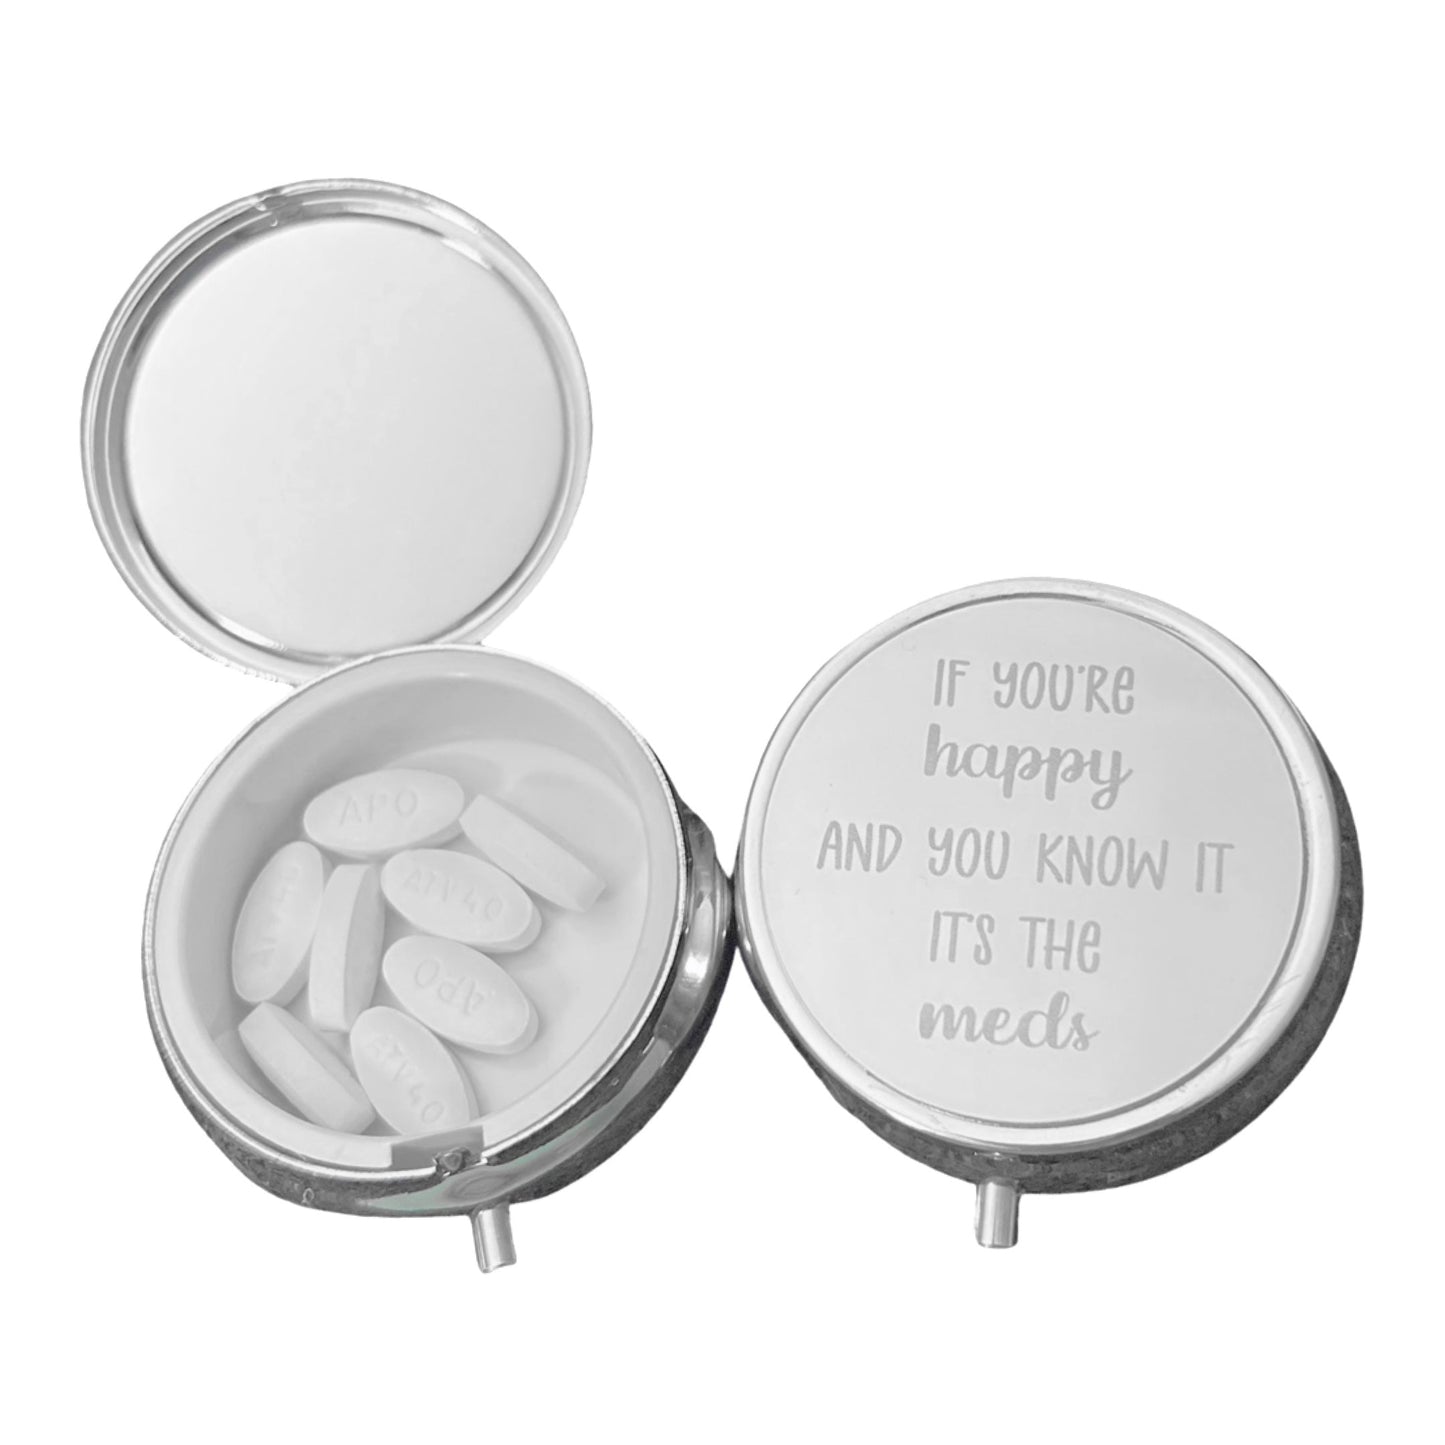 If you're happy and you know it, it's the meds - Trinket | Medicine | Pill Box / Case